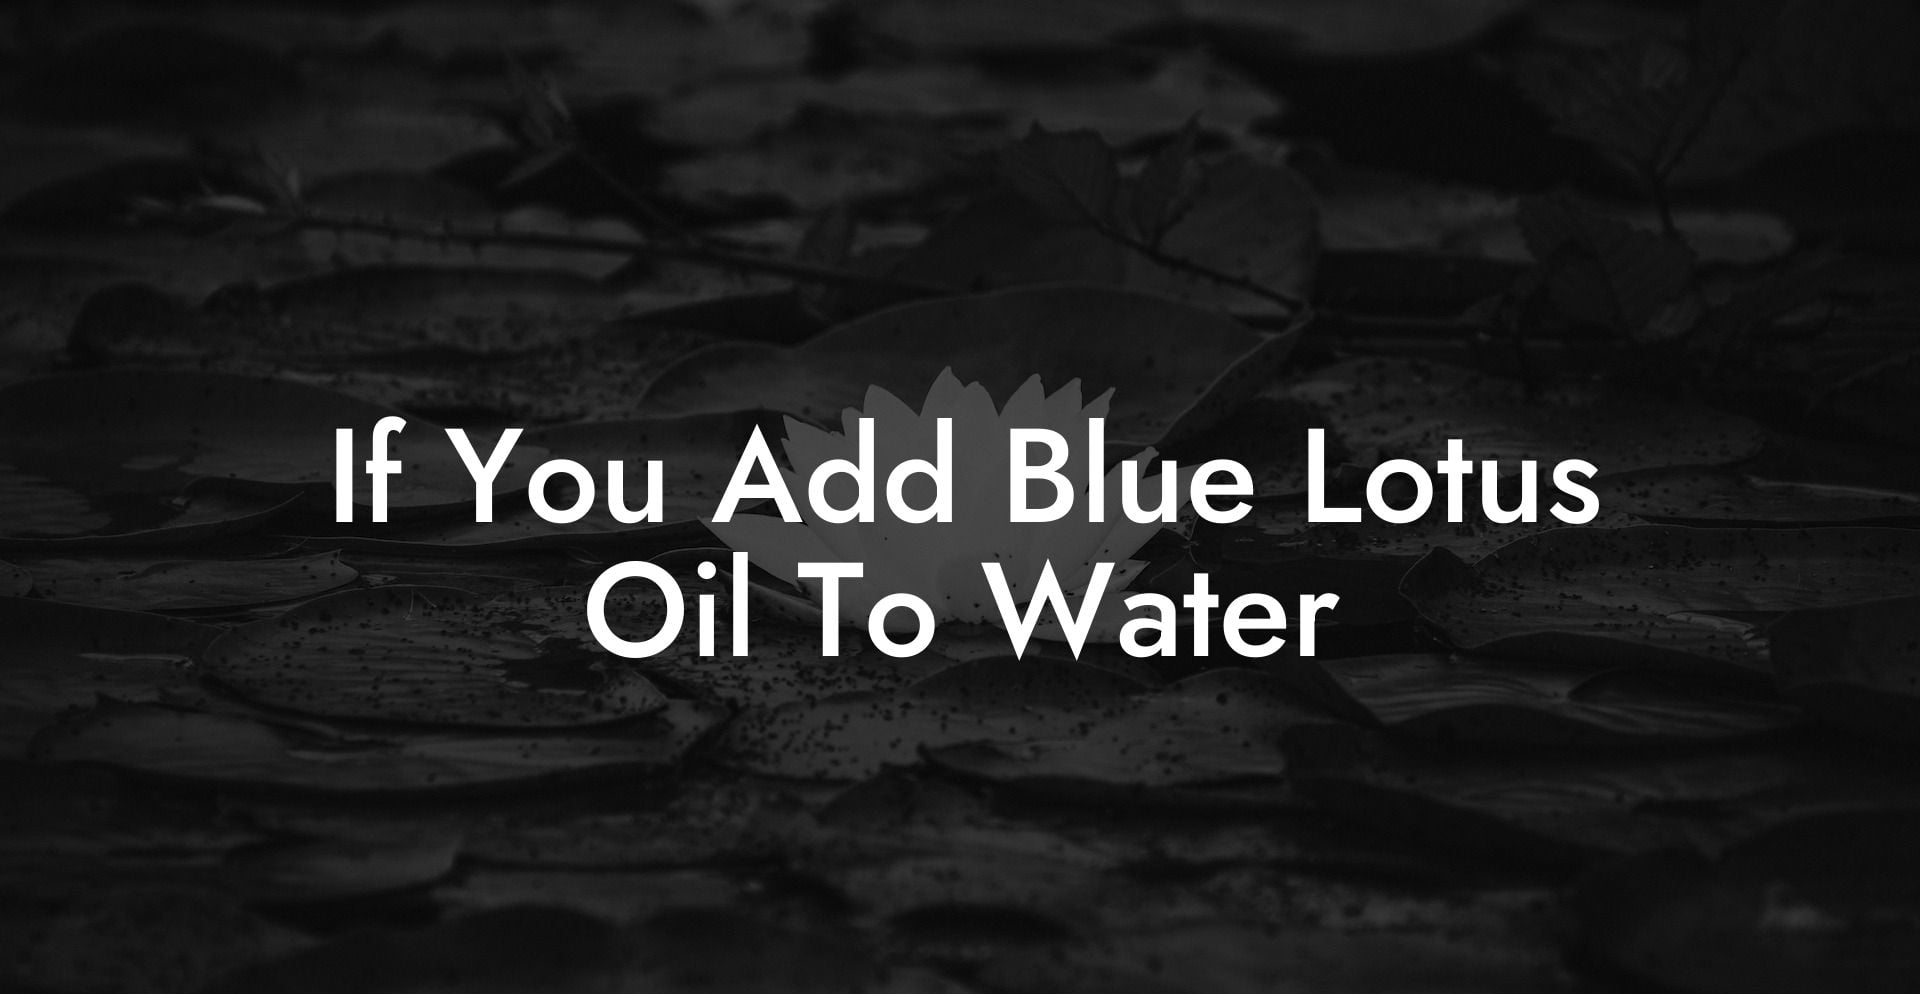 If You Add Blue Lotus Oil To Water